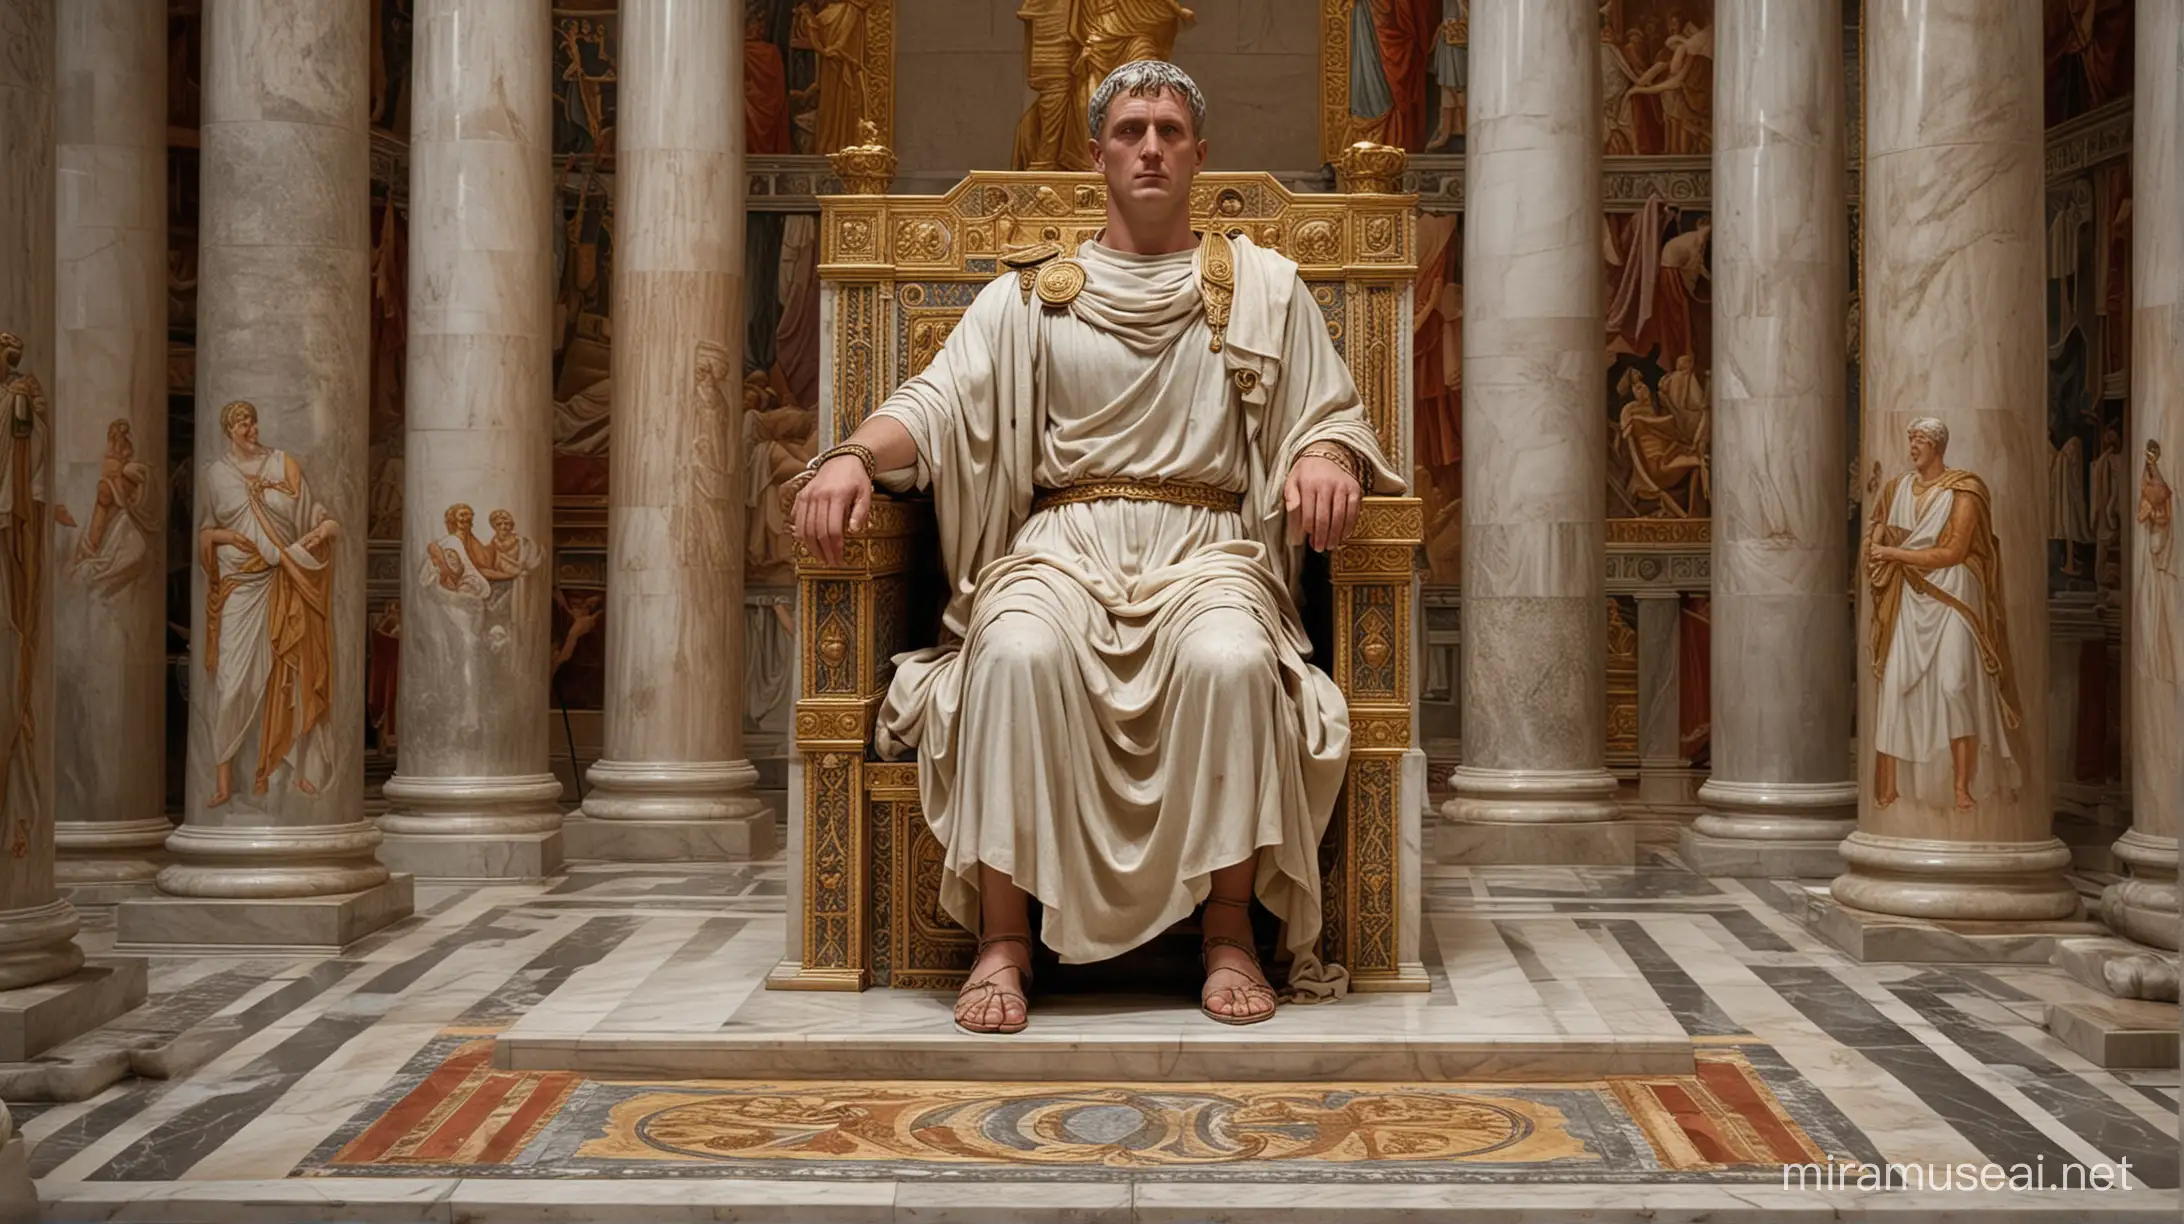 The Roman emperor Trajan, full body, dressed for parade, on the sumptuous throne, reigns. Scene rich in details. The decorations of merit are visible on the emperor's chest. To the left and right of the throne are massive marble columns and the floor is of glossy, shining mosaic